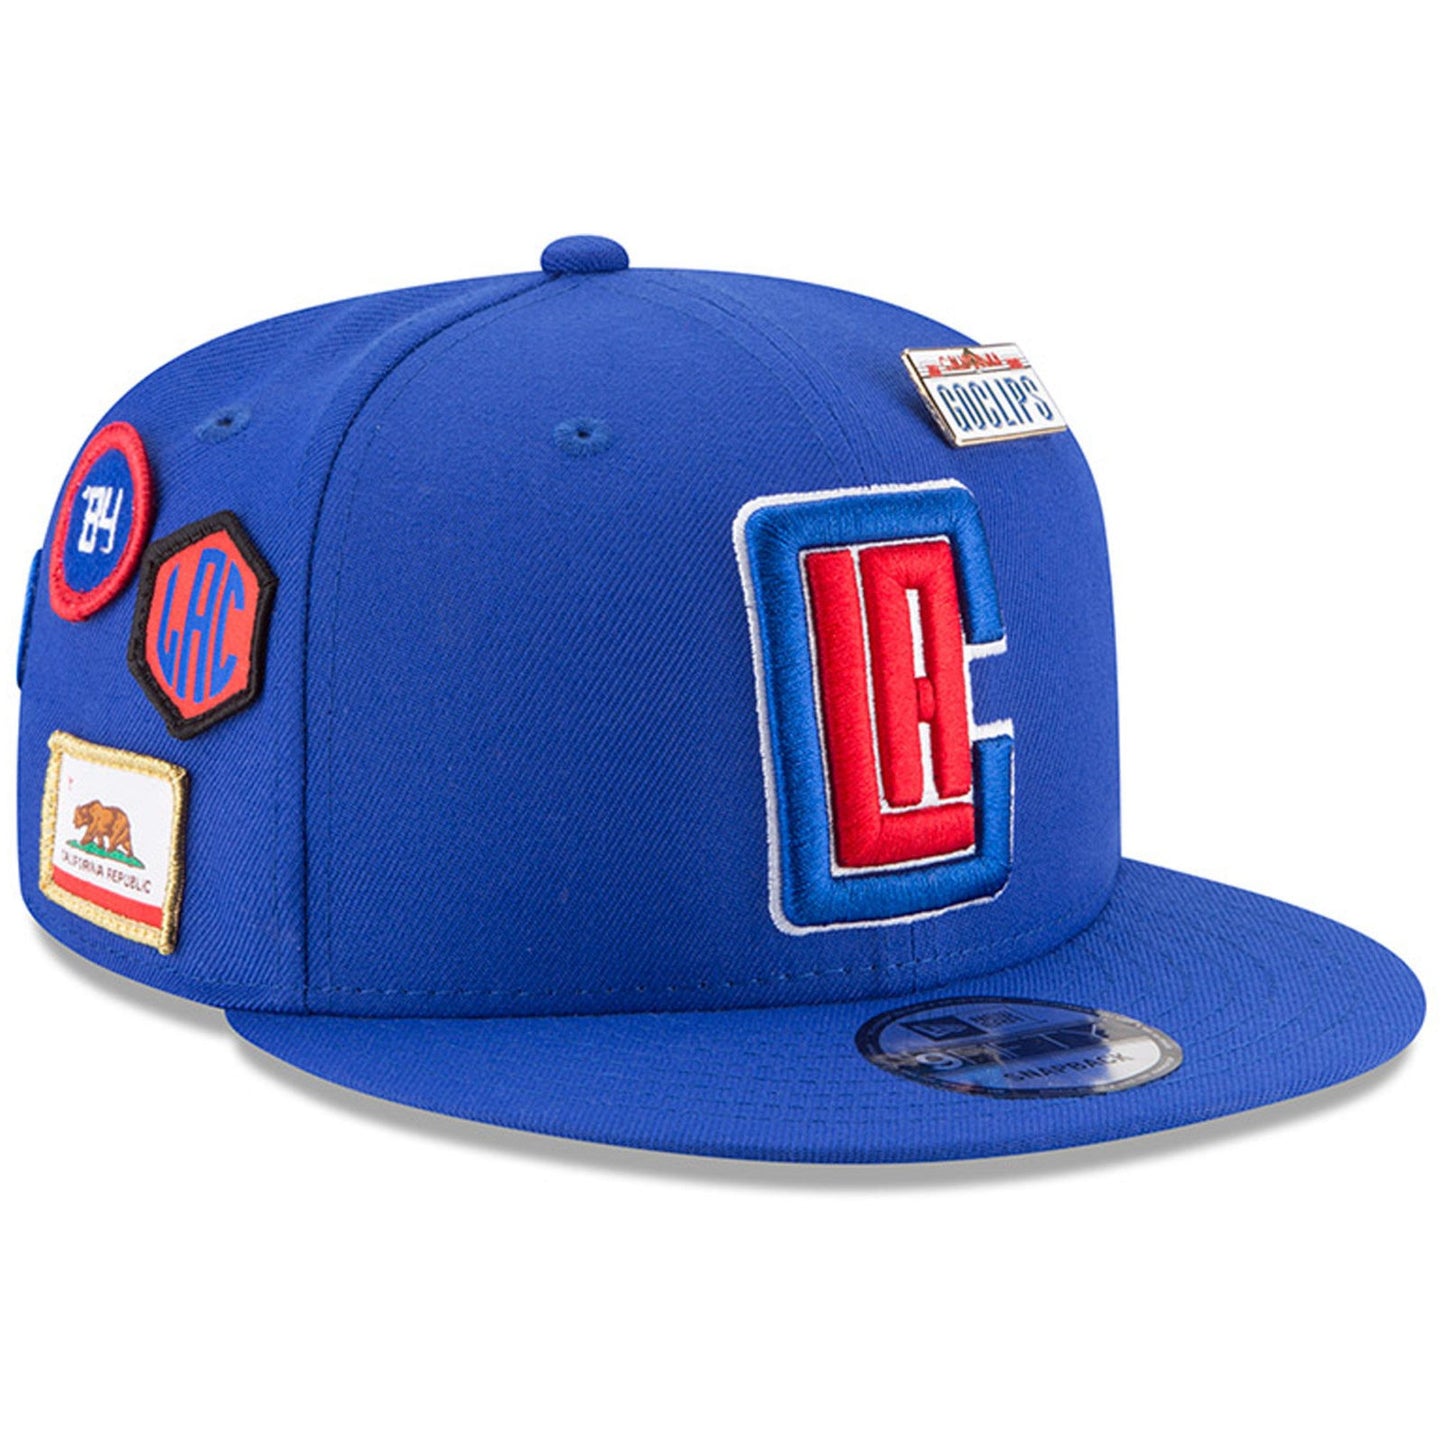 Los Angeles Clippers New Era 2018 Draft 9FIFTY Snapback Adjustable Hat – Royal